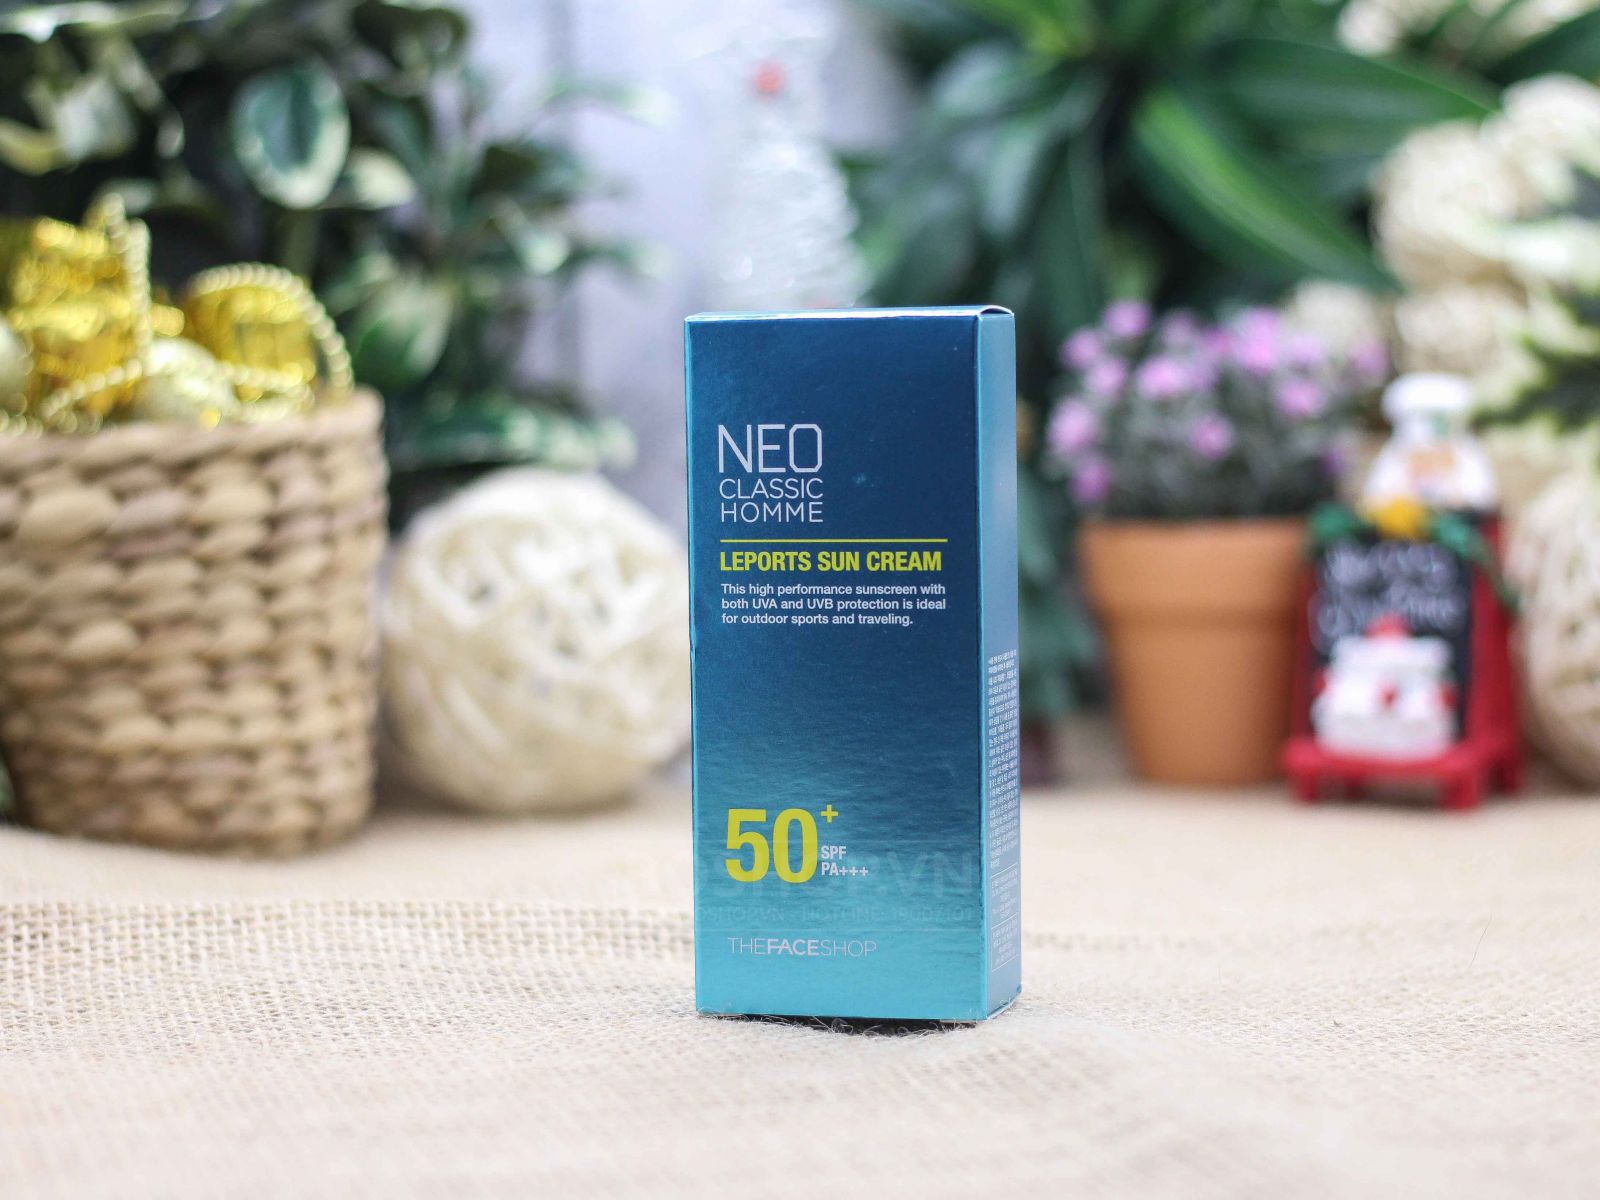 Kem chống nắng The Face Shop Neo Classic Homme Leports Sun Cream